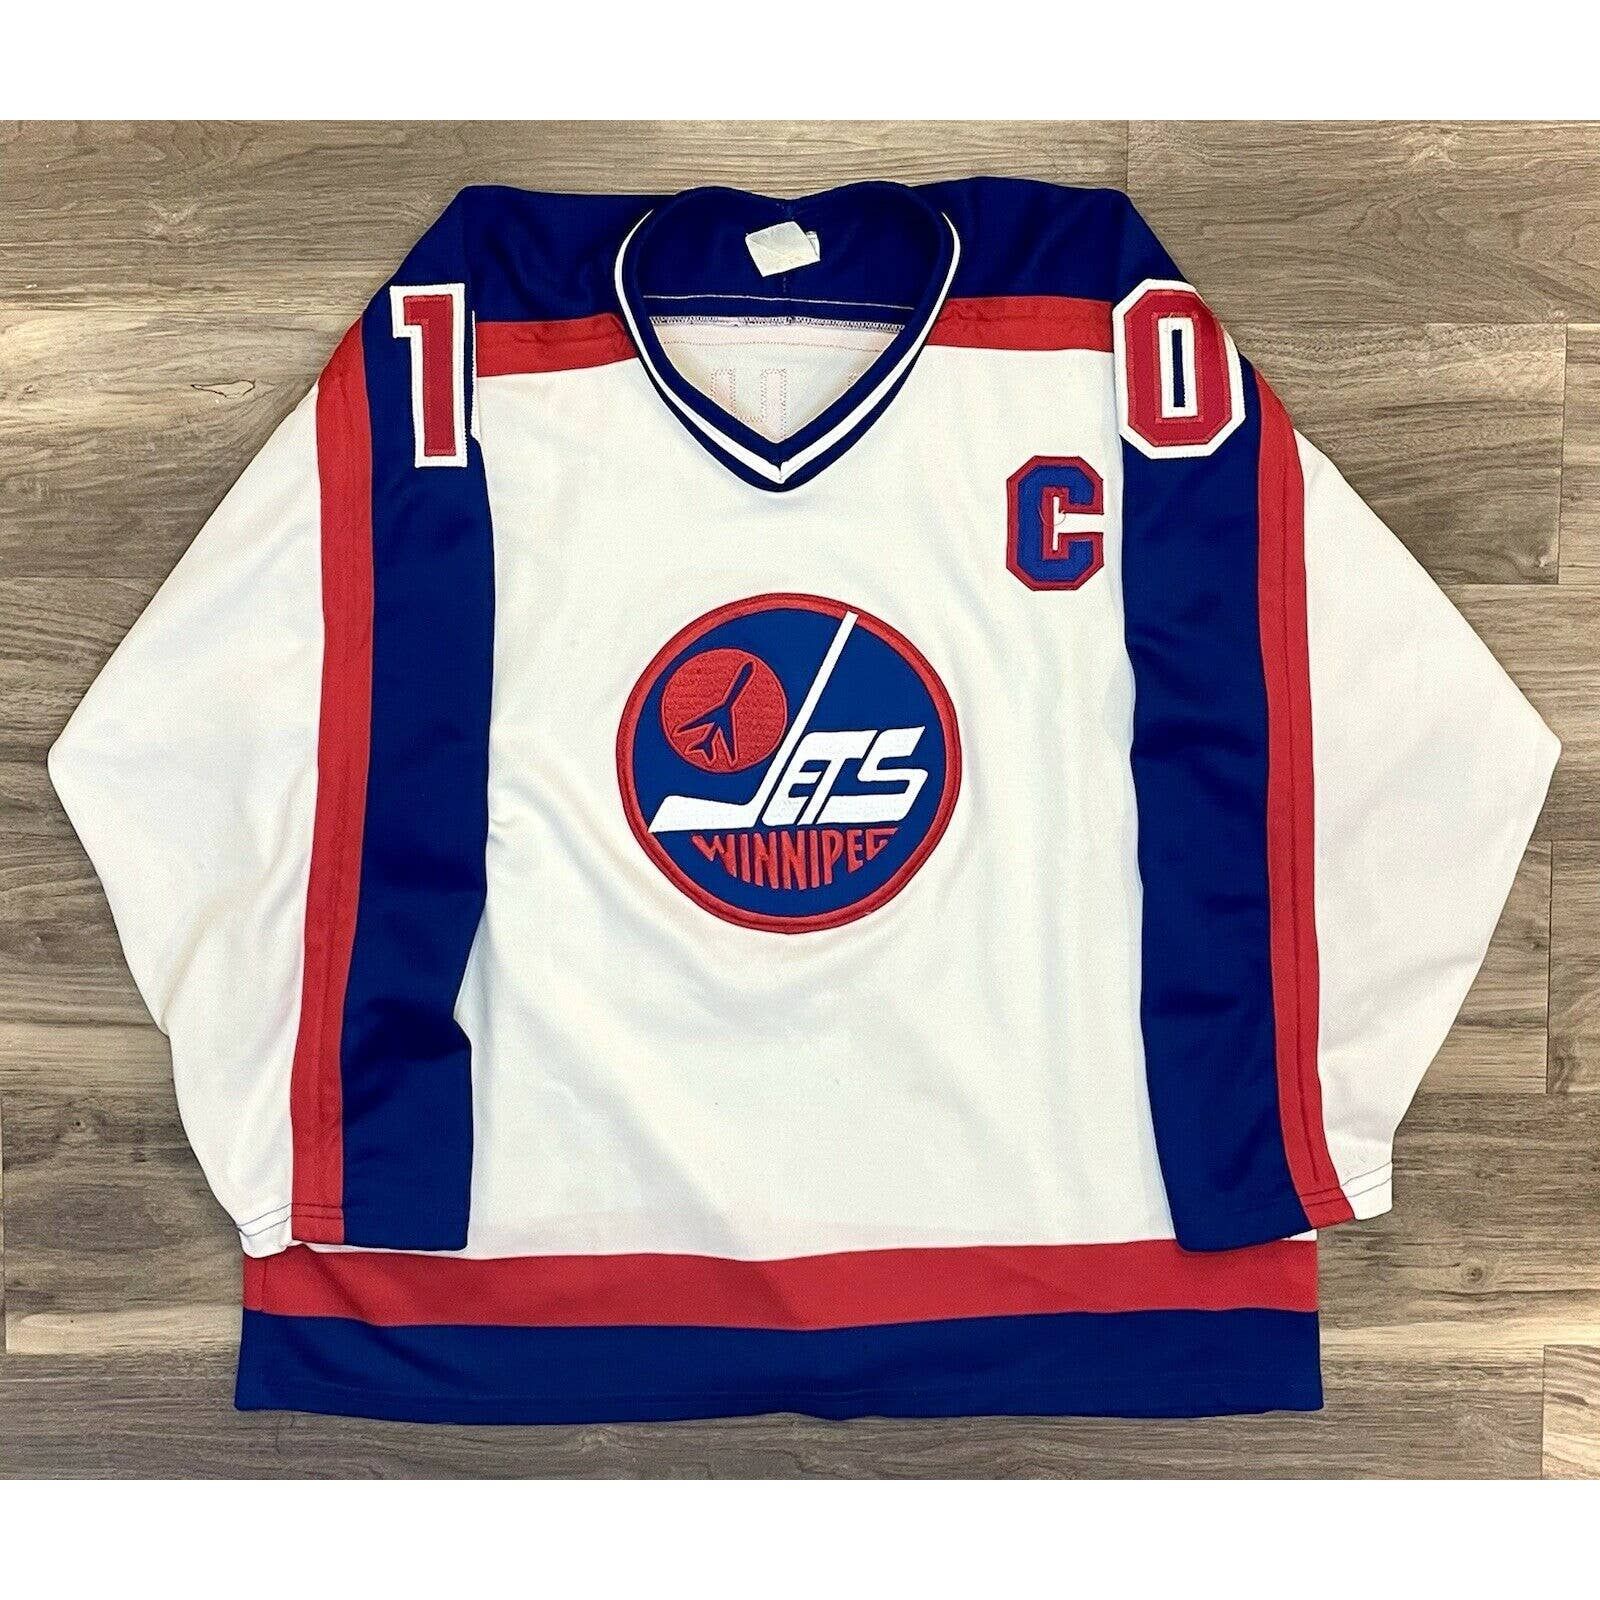 wha jets jersey